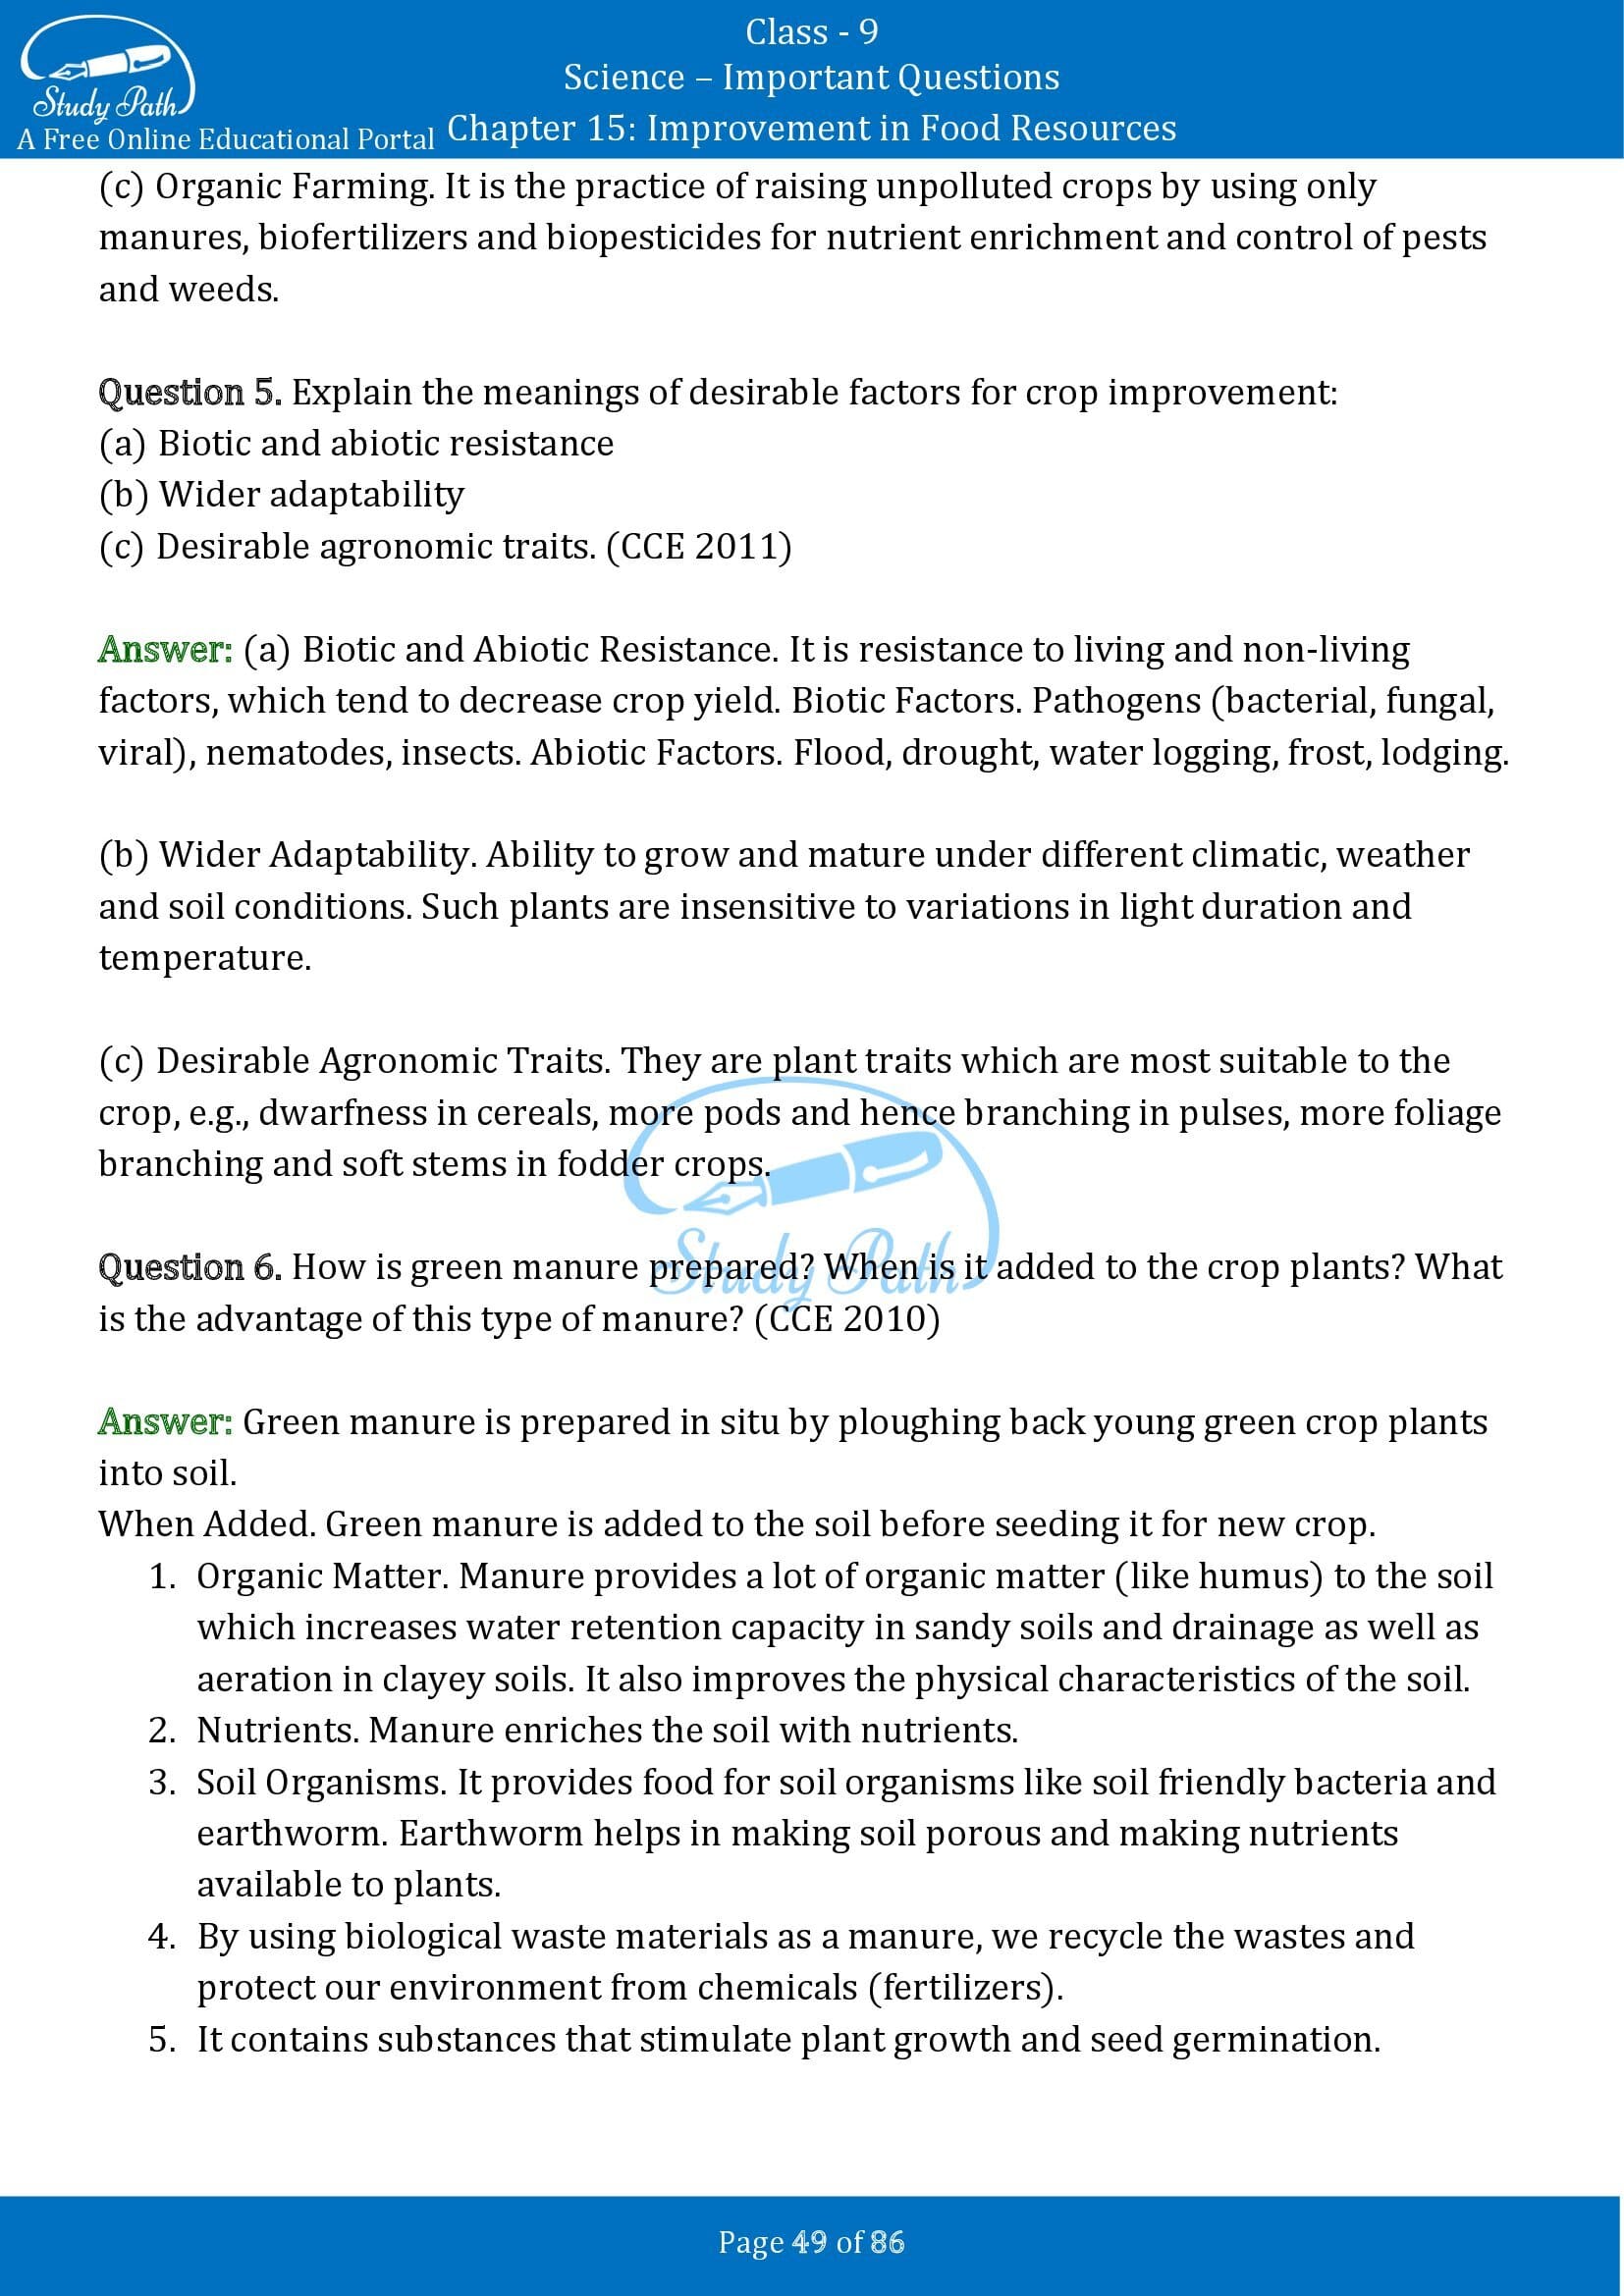 Important Questions for Class 9 Science Chapter 15 Improvement in Food Resources 00049